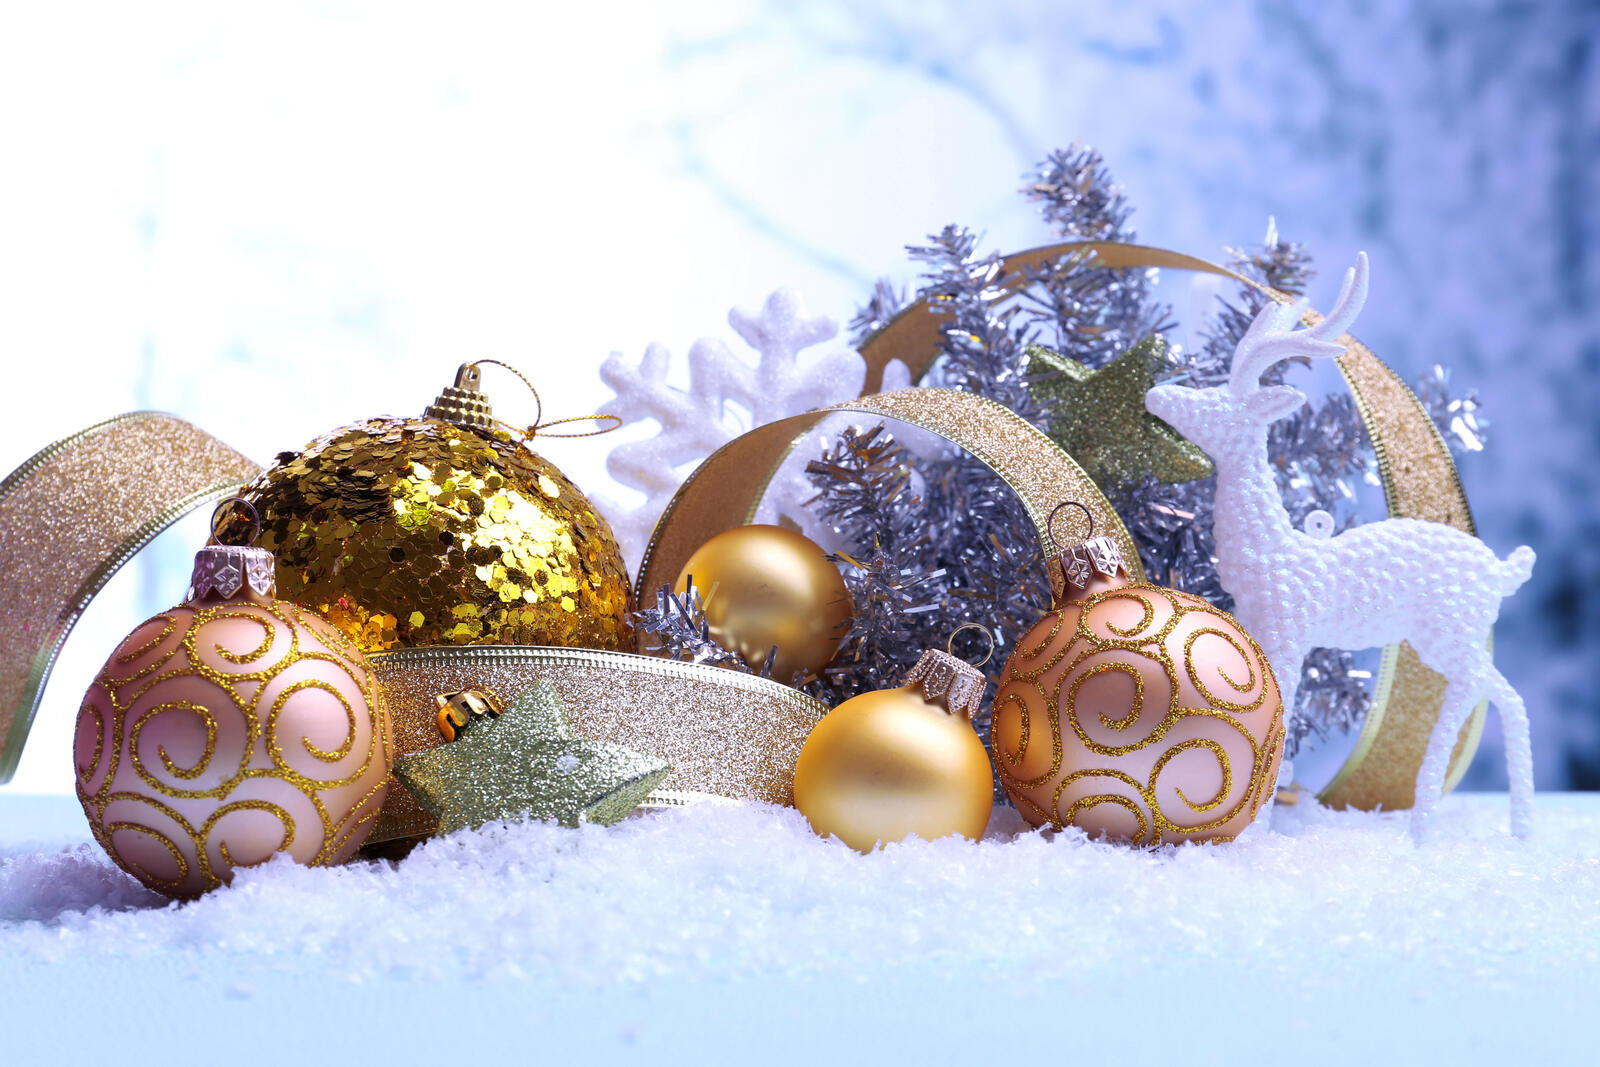 Wallpapers design elements Christmas toys on the desktop